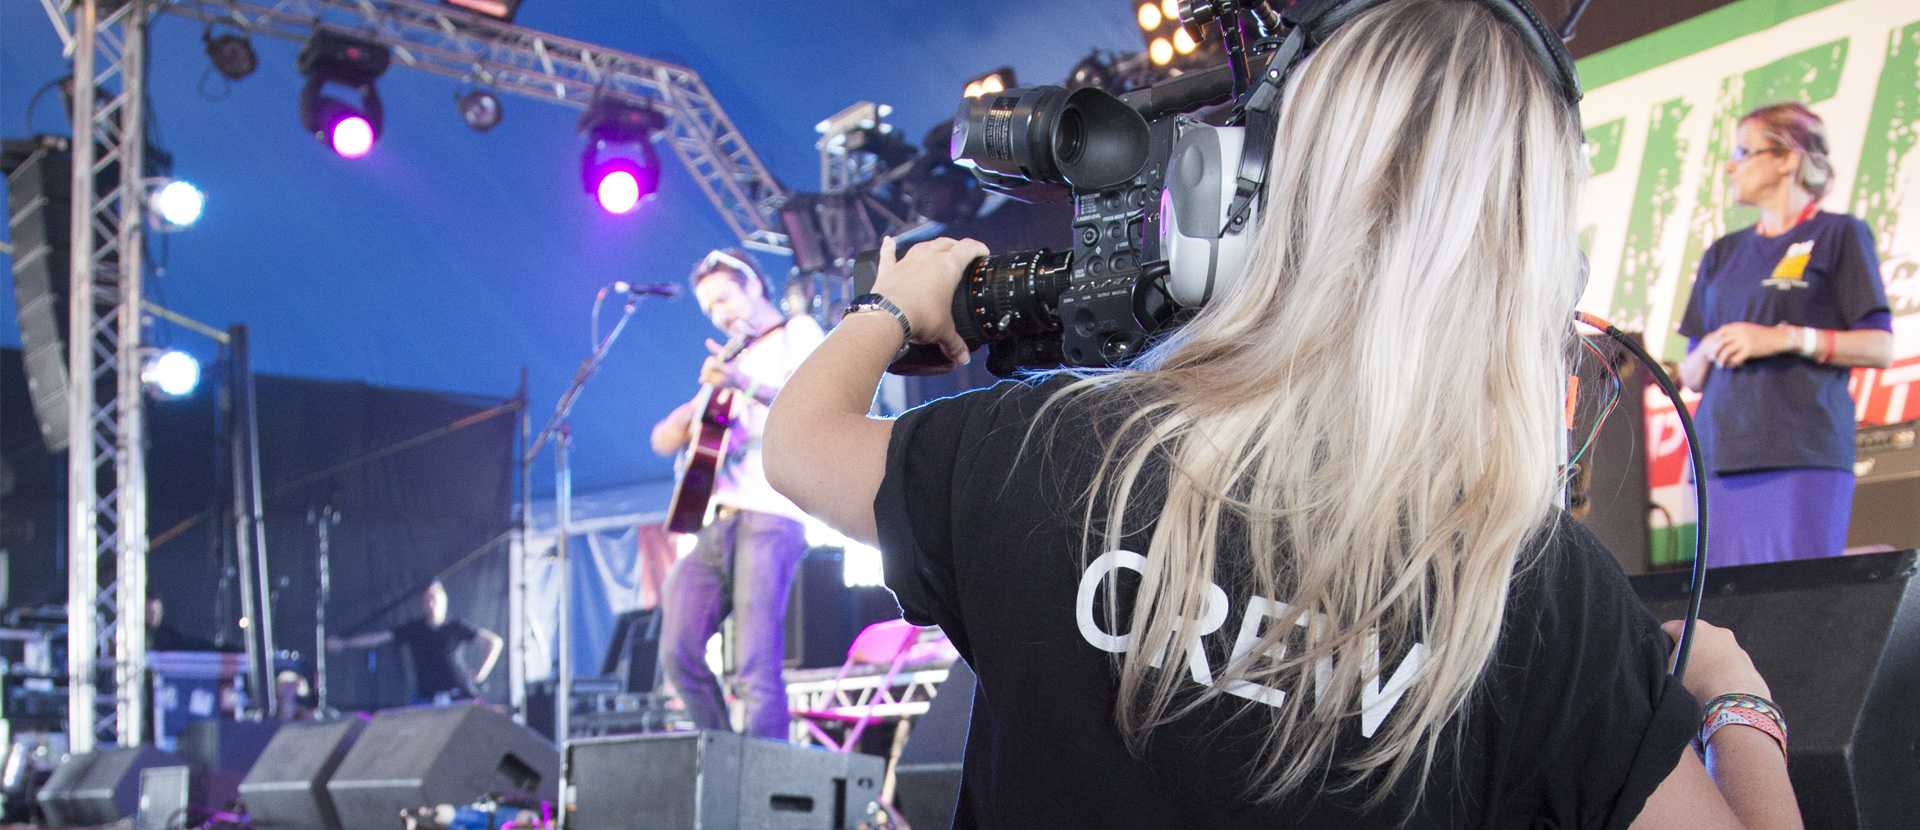 Image shows camera operator working at festival